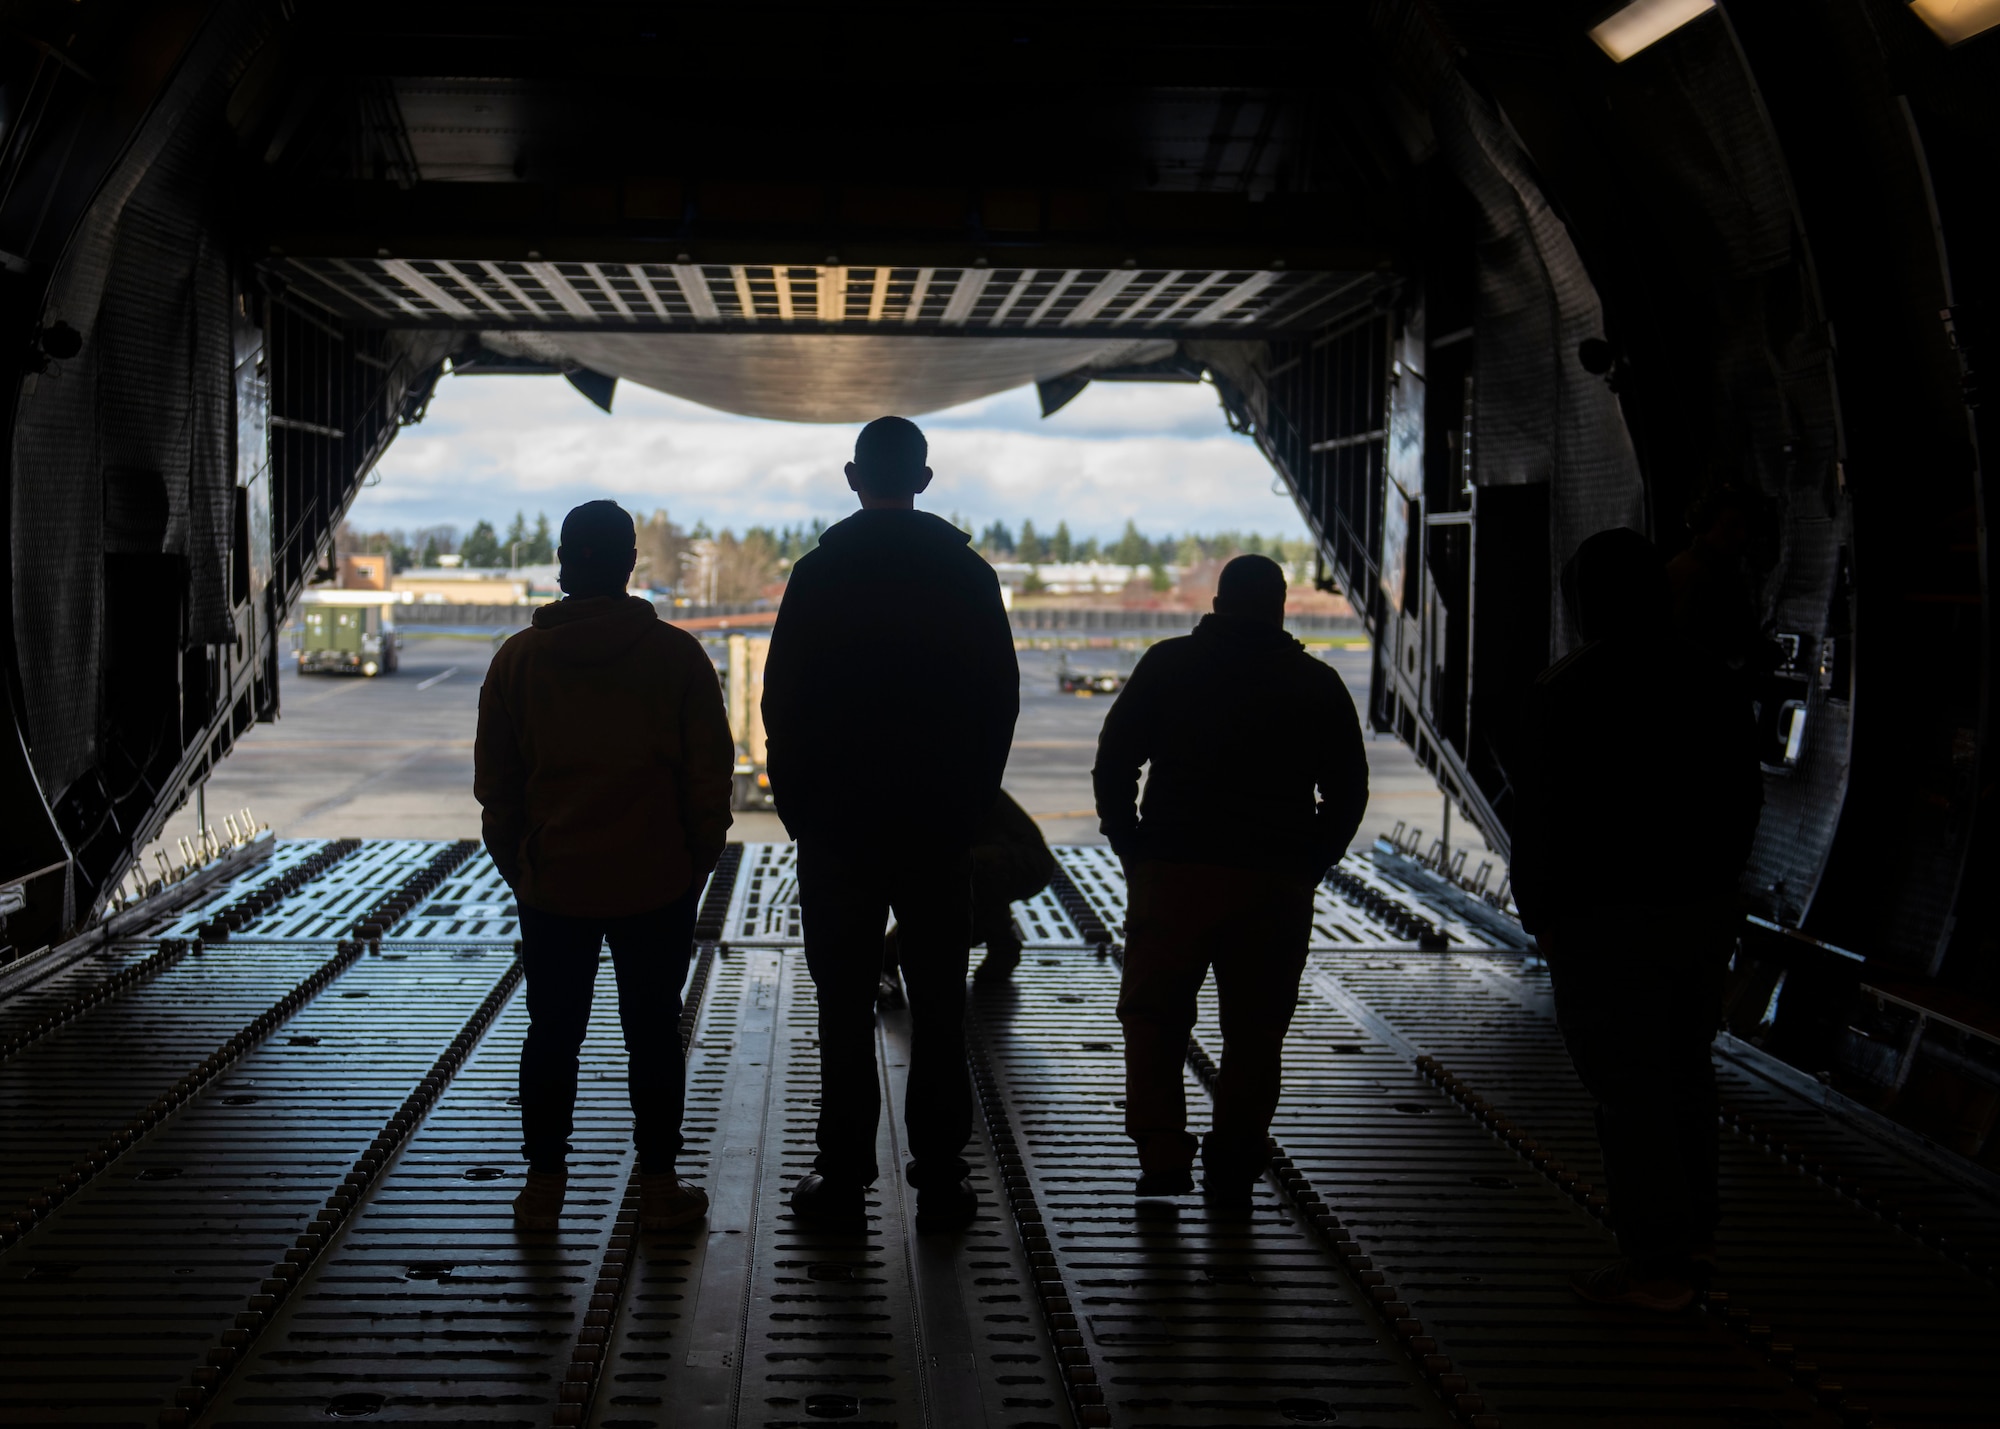 U.S. Air Force Airmen and Navy Sailors load cargo onto a C-5M Super Galaxy at Joint Base Lewis-McChord, Wash., Dec. 8, 2023. The joint operation consisted of loading cargo and mini submersibles on the aircraft and was conducted by service members from Travis Air Force Base, Calif., Joint Base Pearl Harbor-Hickam, Hawaii, and JBLM. (U.S. Air Force photo by Airman 1st Class Megan Geiger)